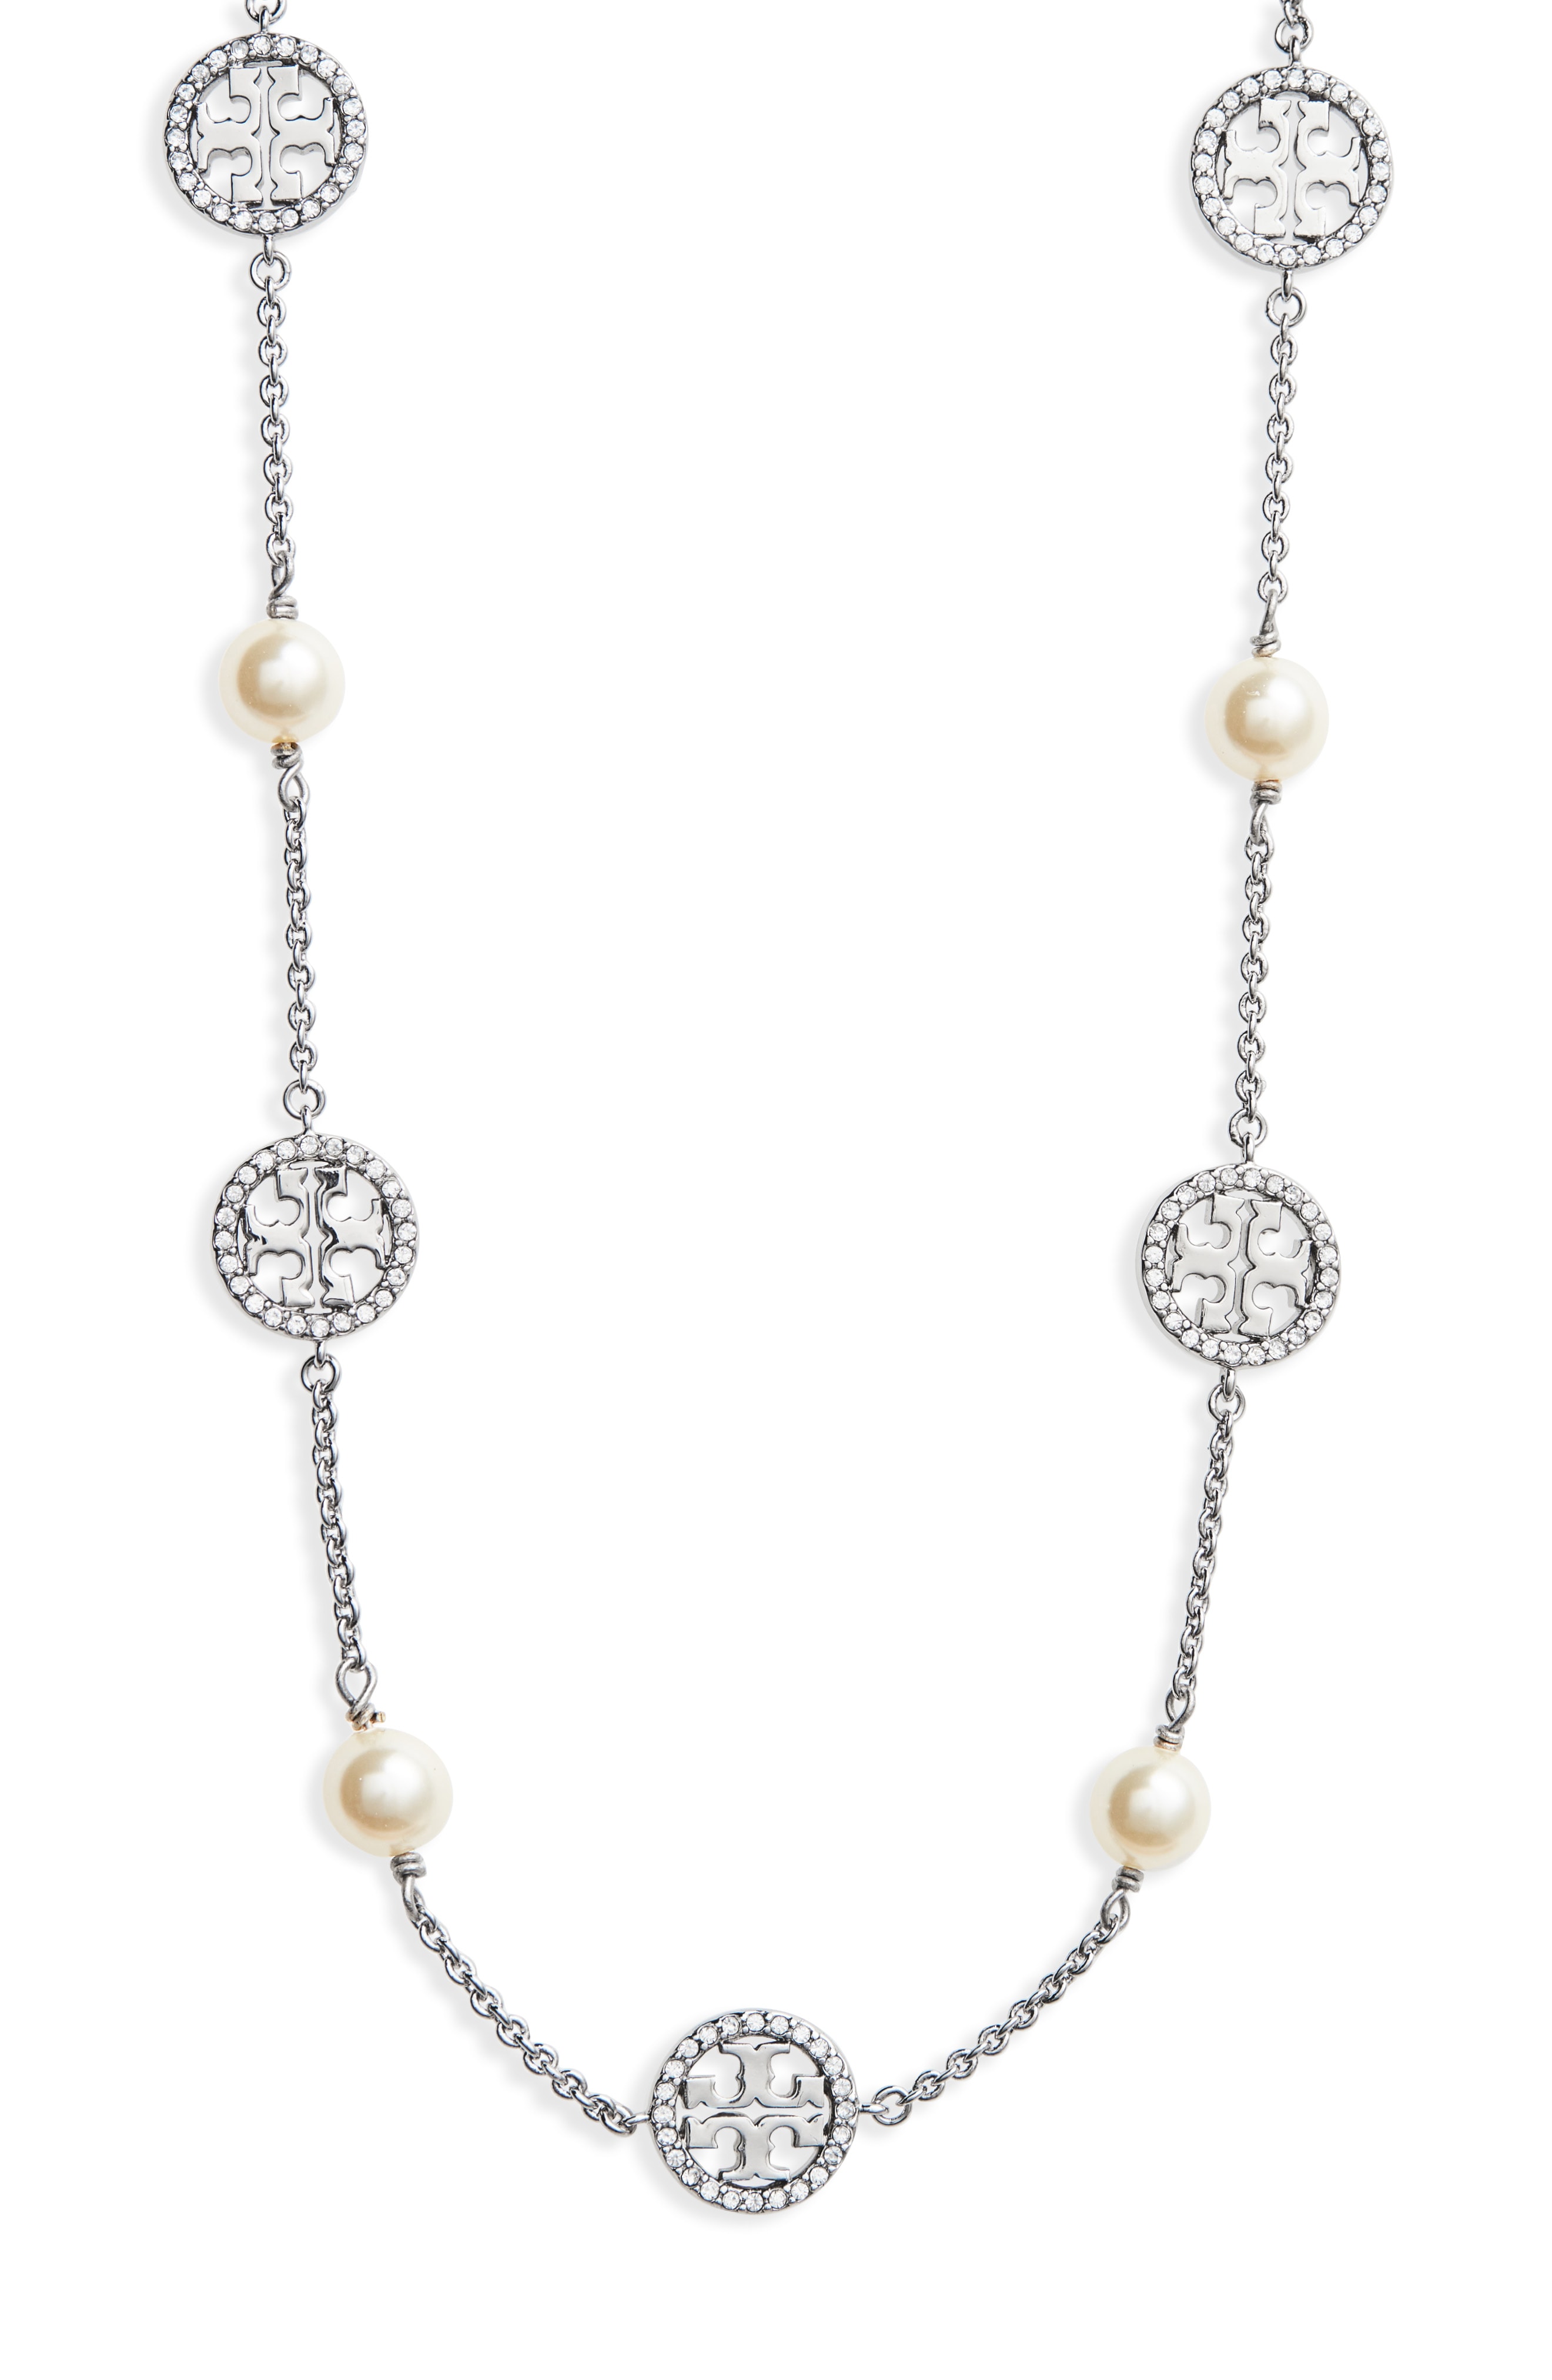 Tory Burch Crystal & Imitation Pearl Necklace